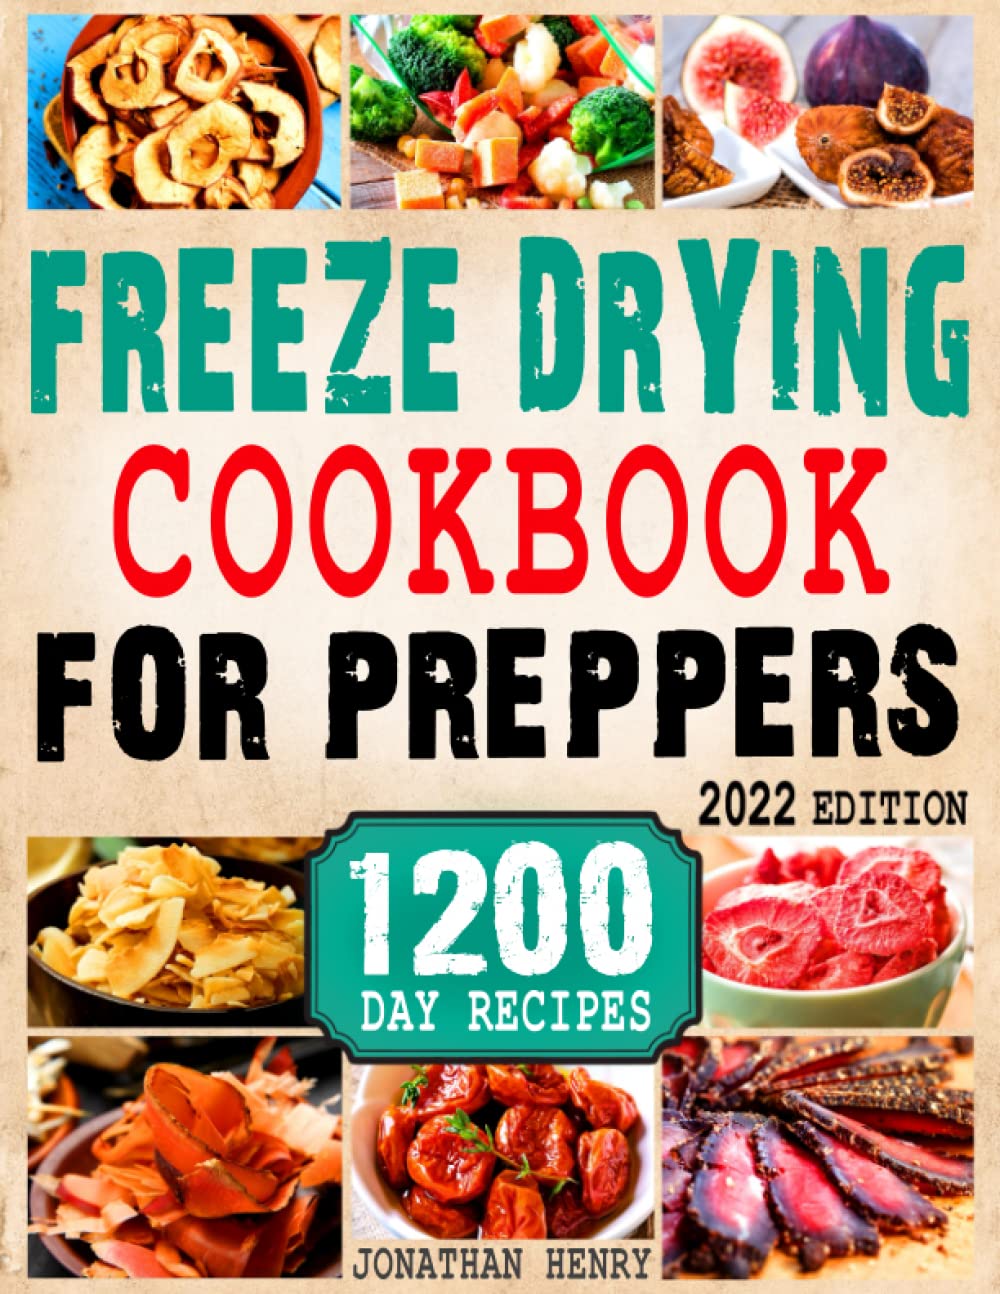 Freeze Drying Cookbook for Preppers: The Complete Preppers Guide to Freeze Dry and Preserve Nutrient Dense Food Safely at Home to Be Prepared for the Worst. 1200-Days, Easy & Tasty Recipes Included